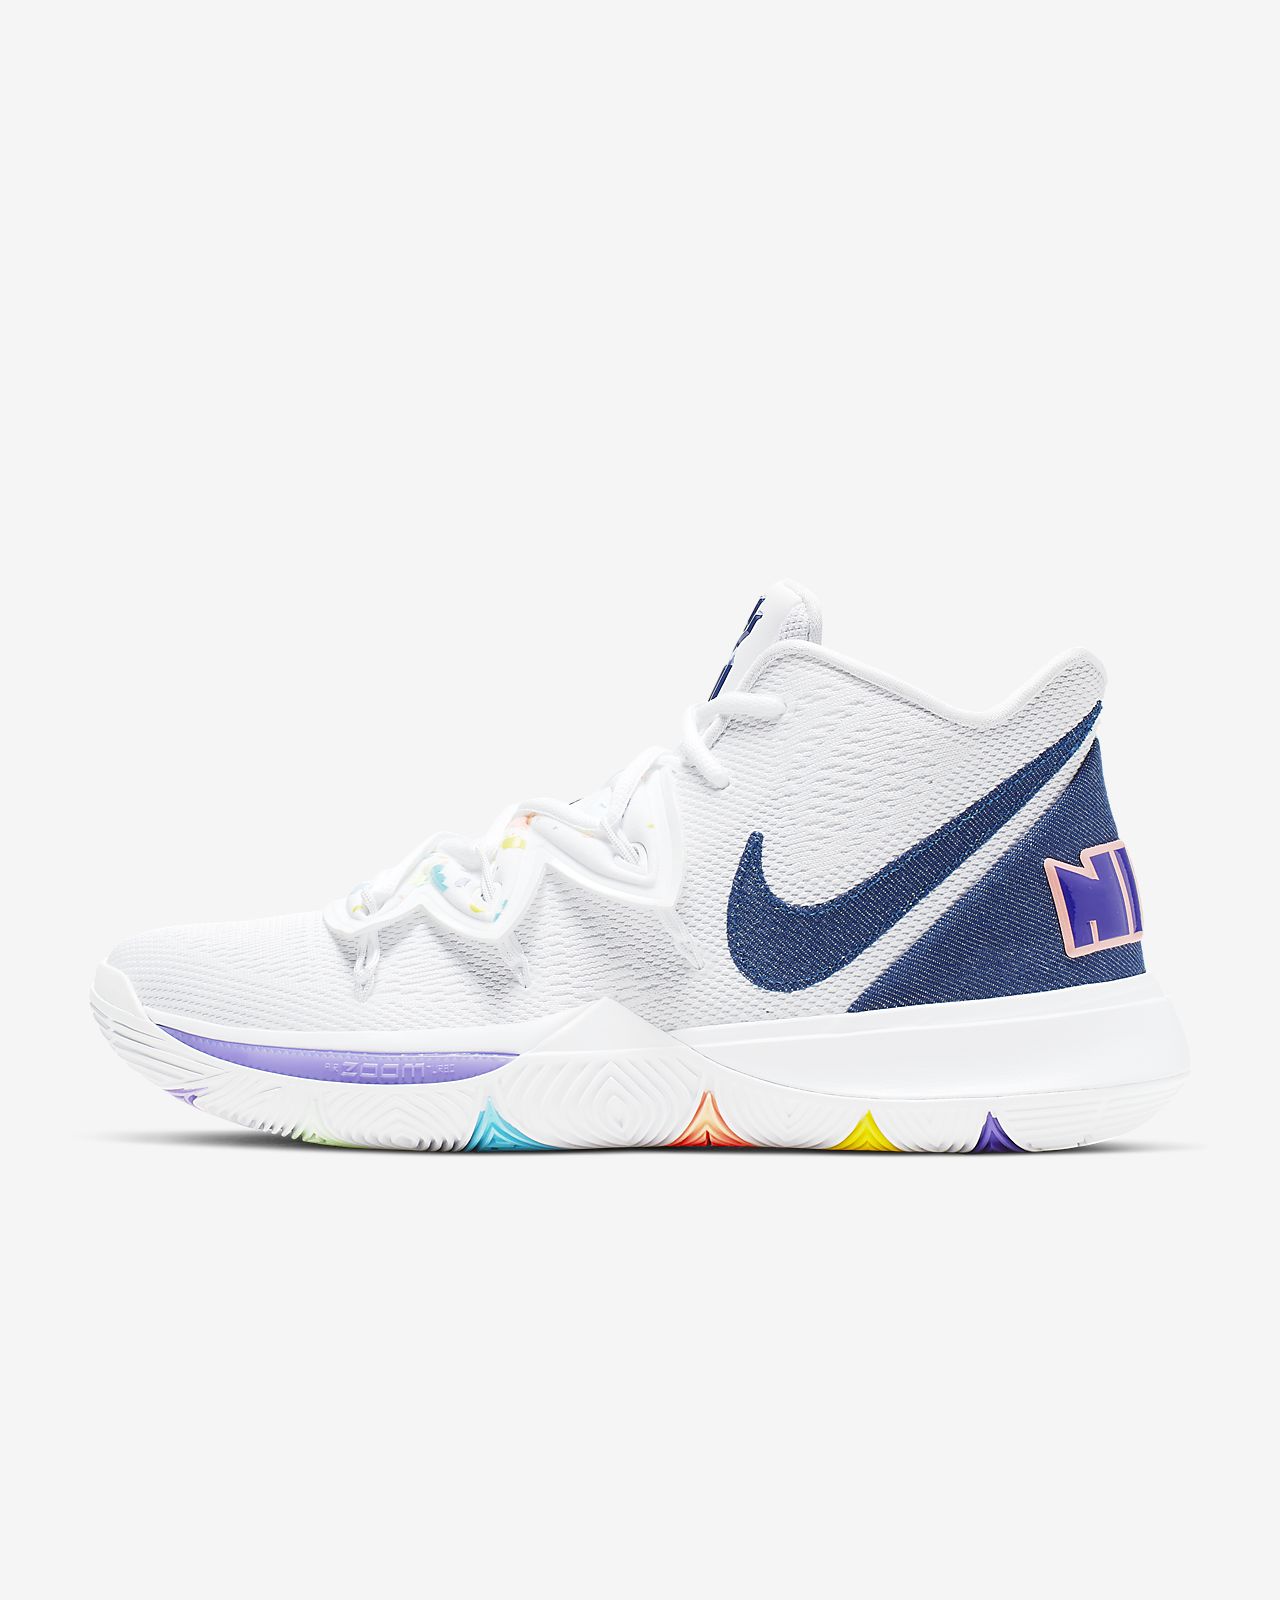 kyrie 5 all shoes